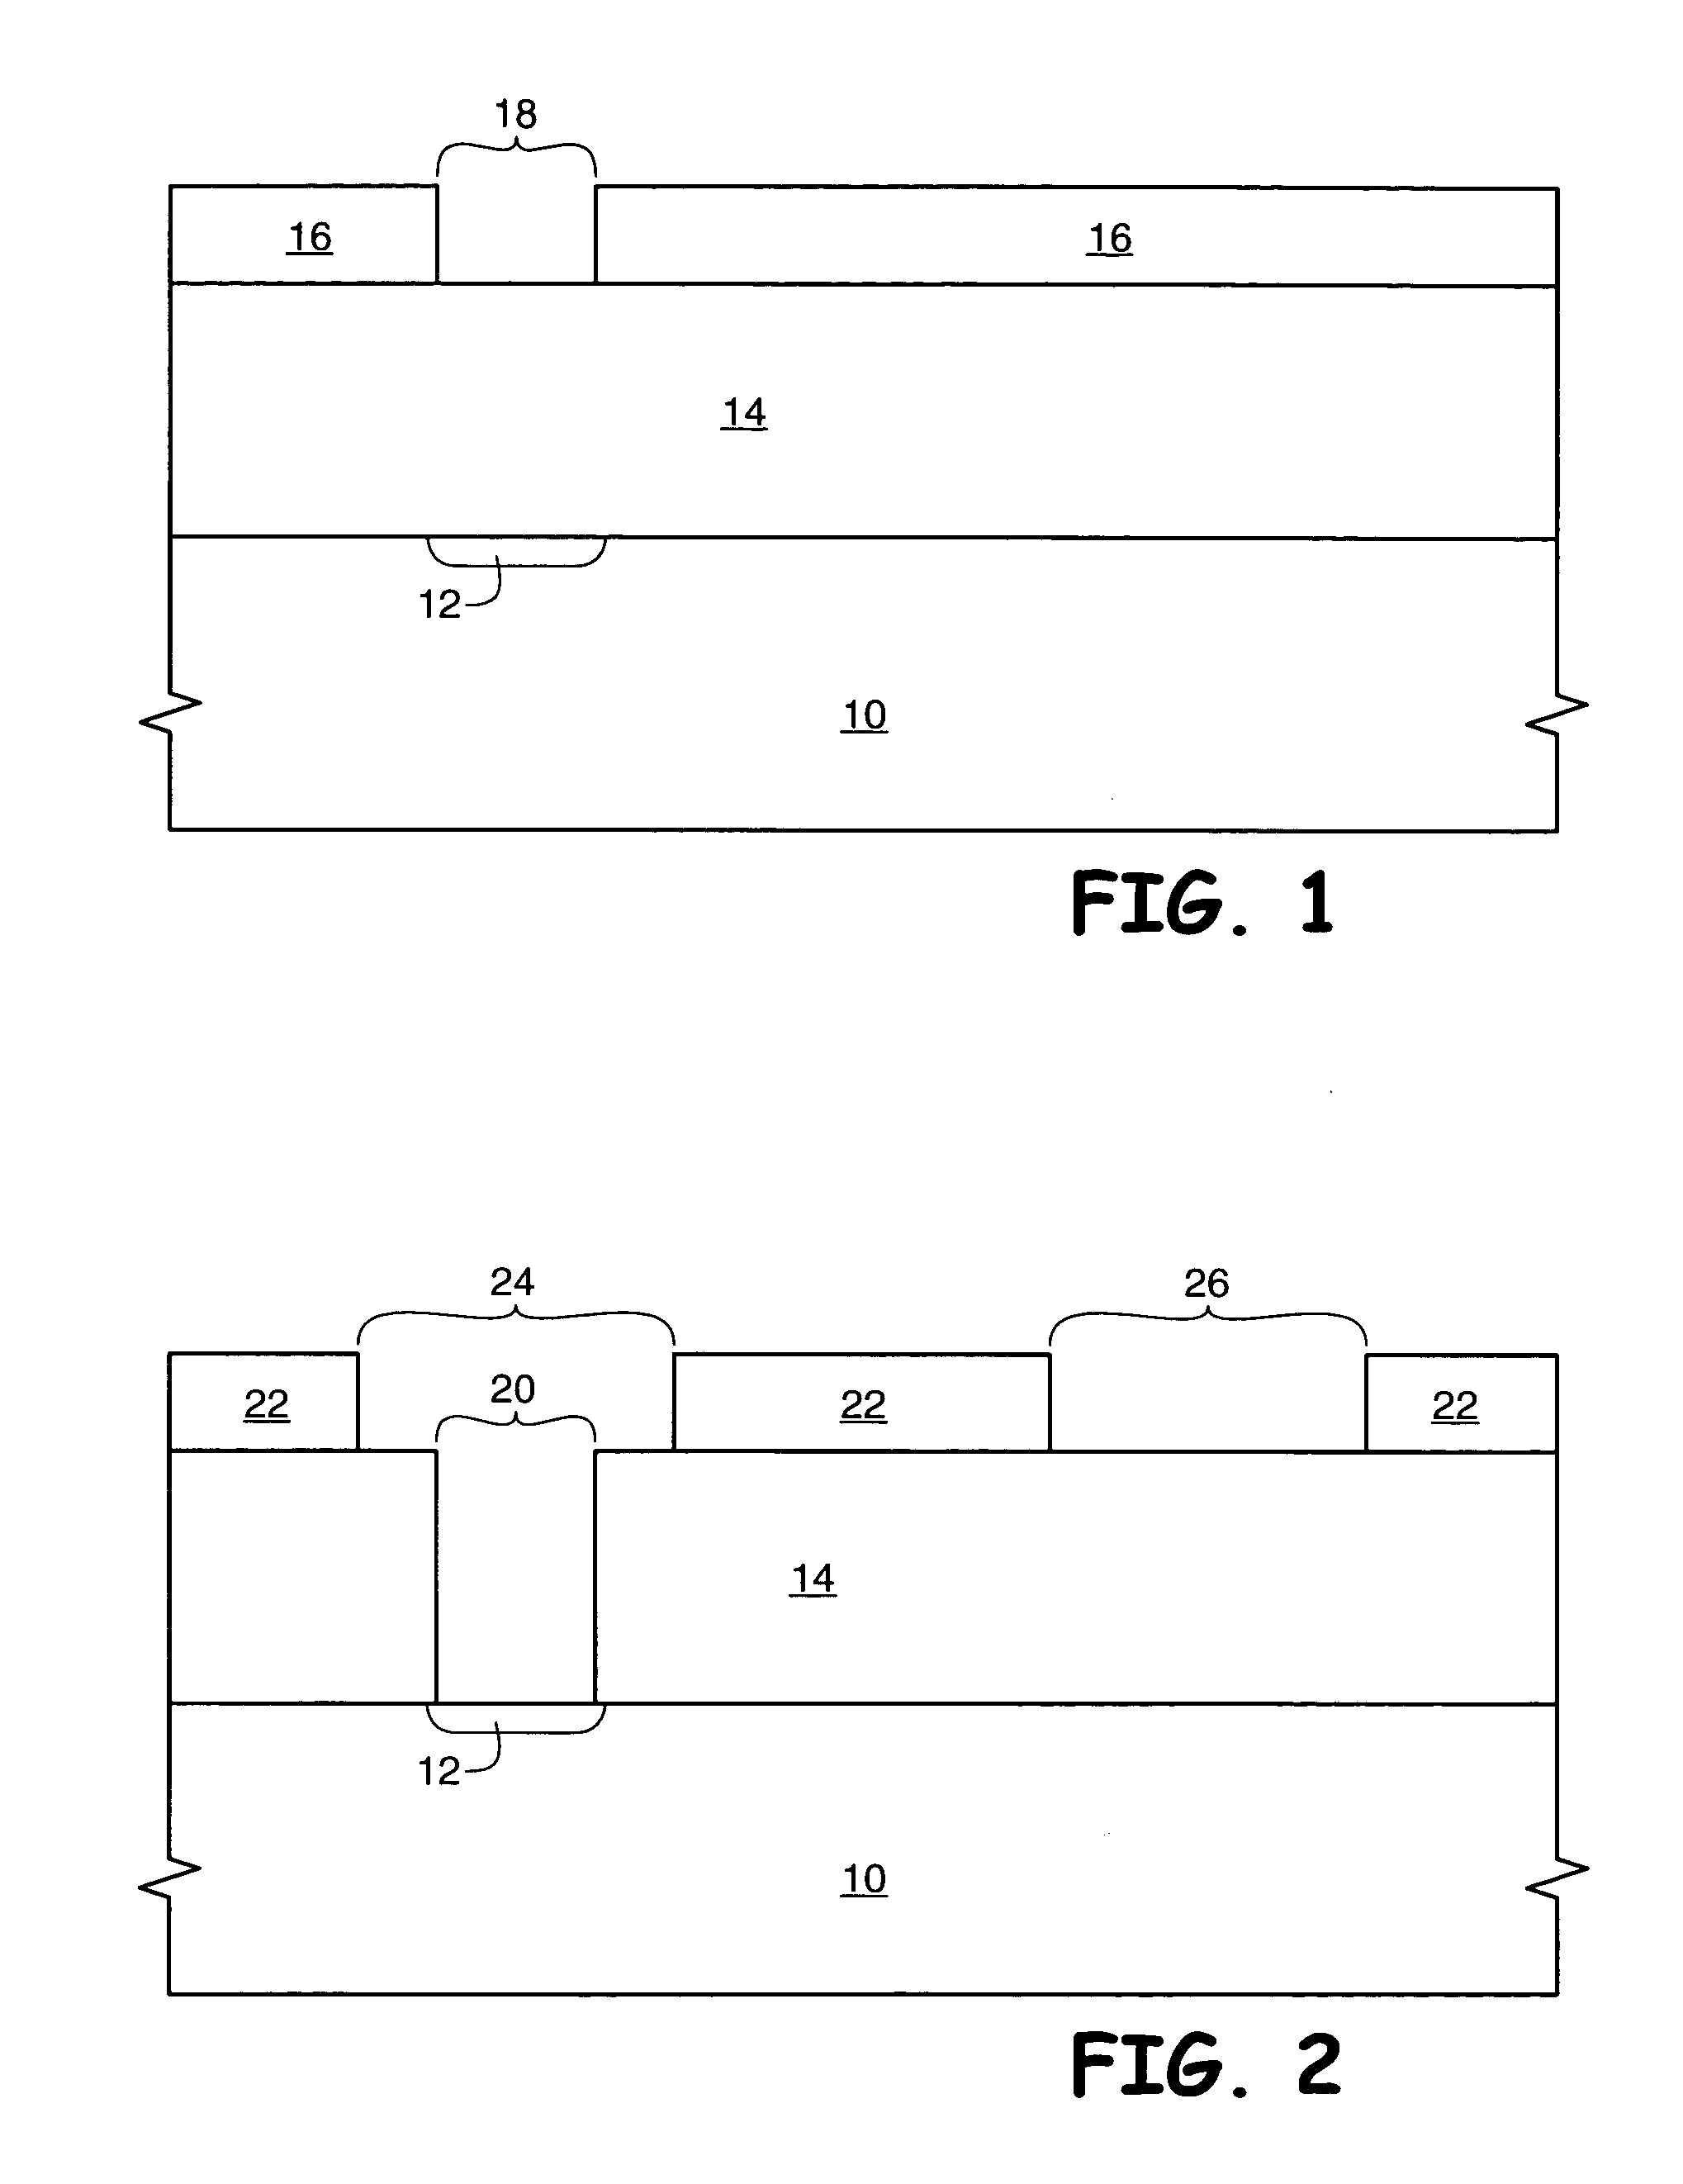 Method for forming a dual layer, low resistance metallization during the formation of a semiconductor device